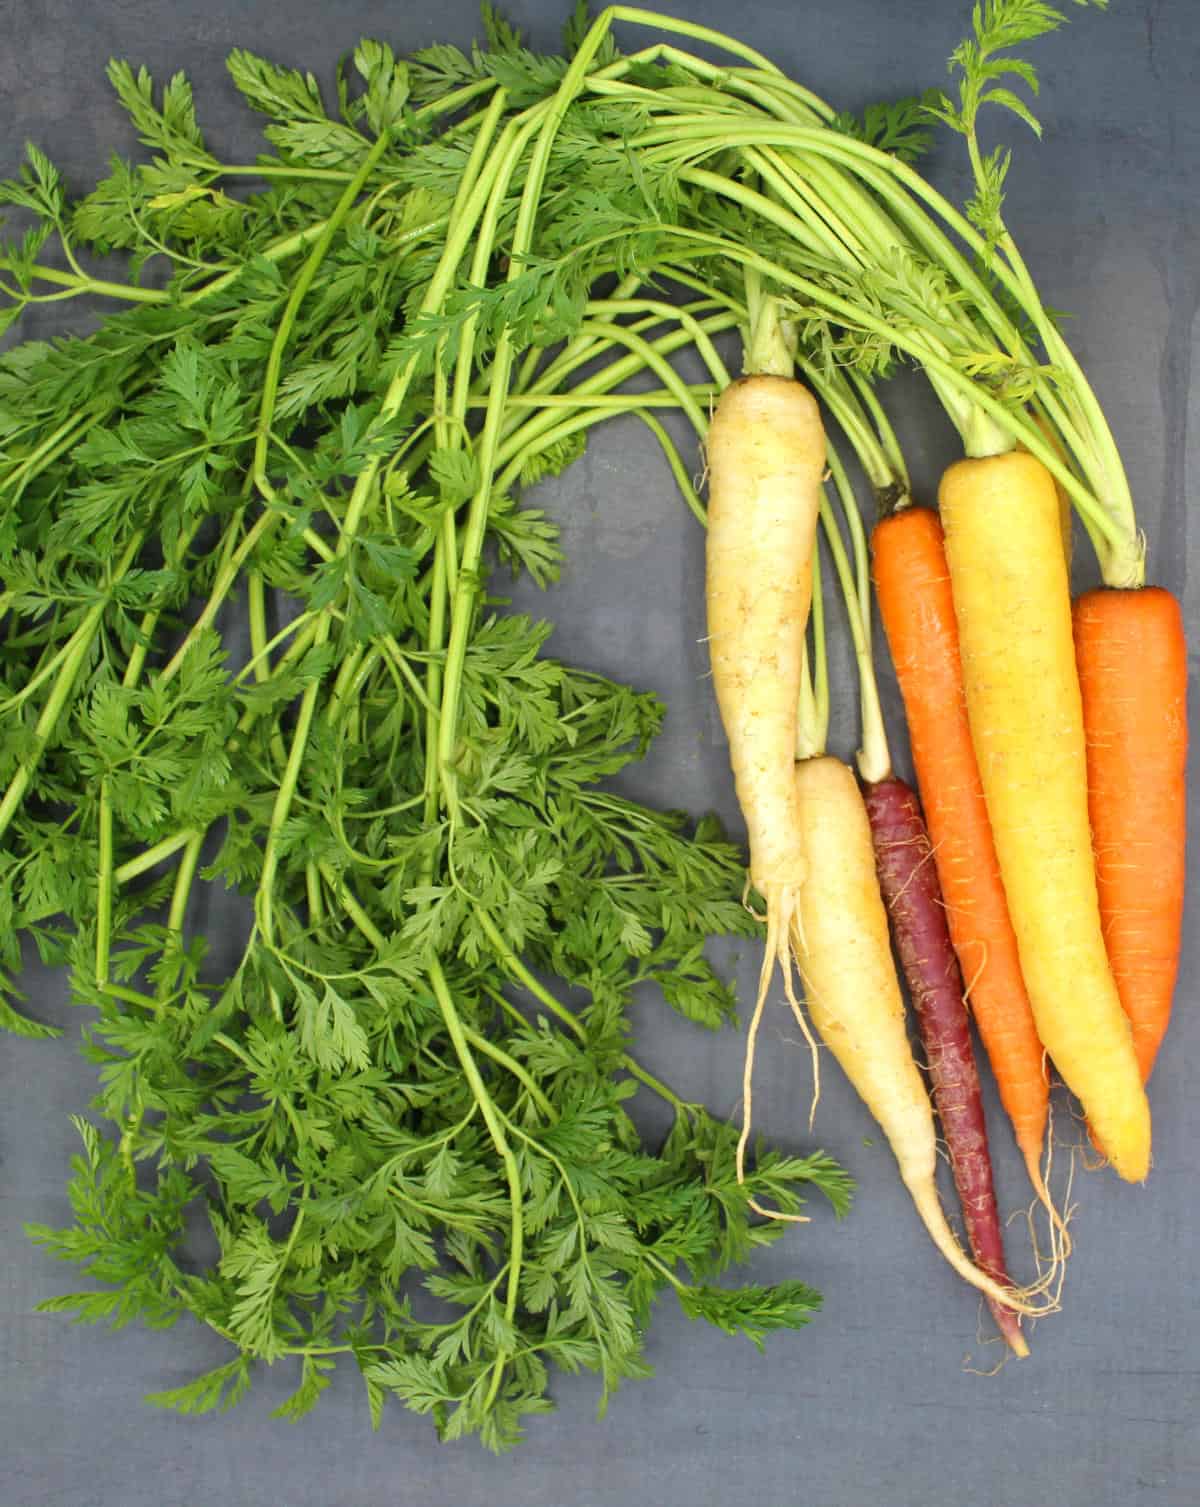 Multicolored carrots with their fronds or leaves.